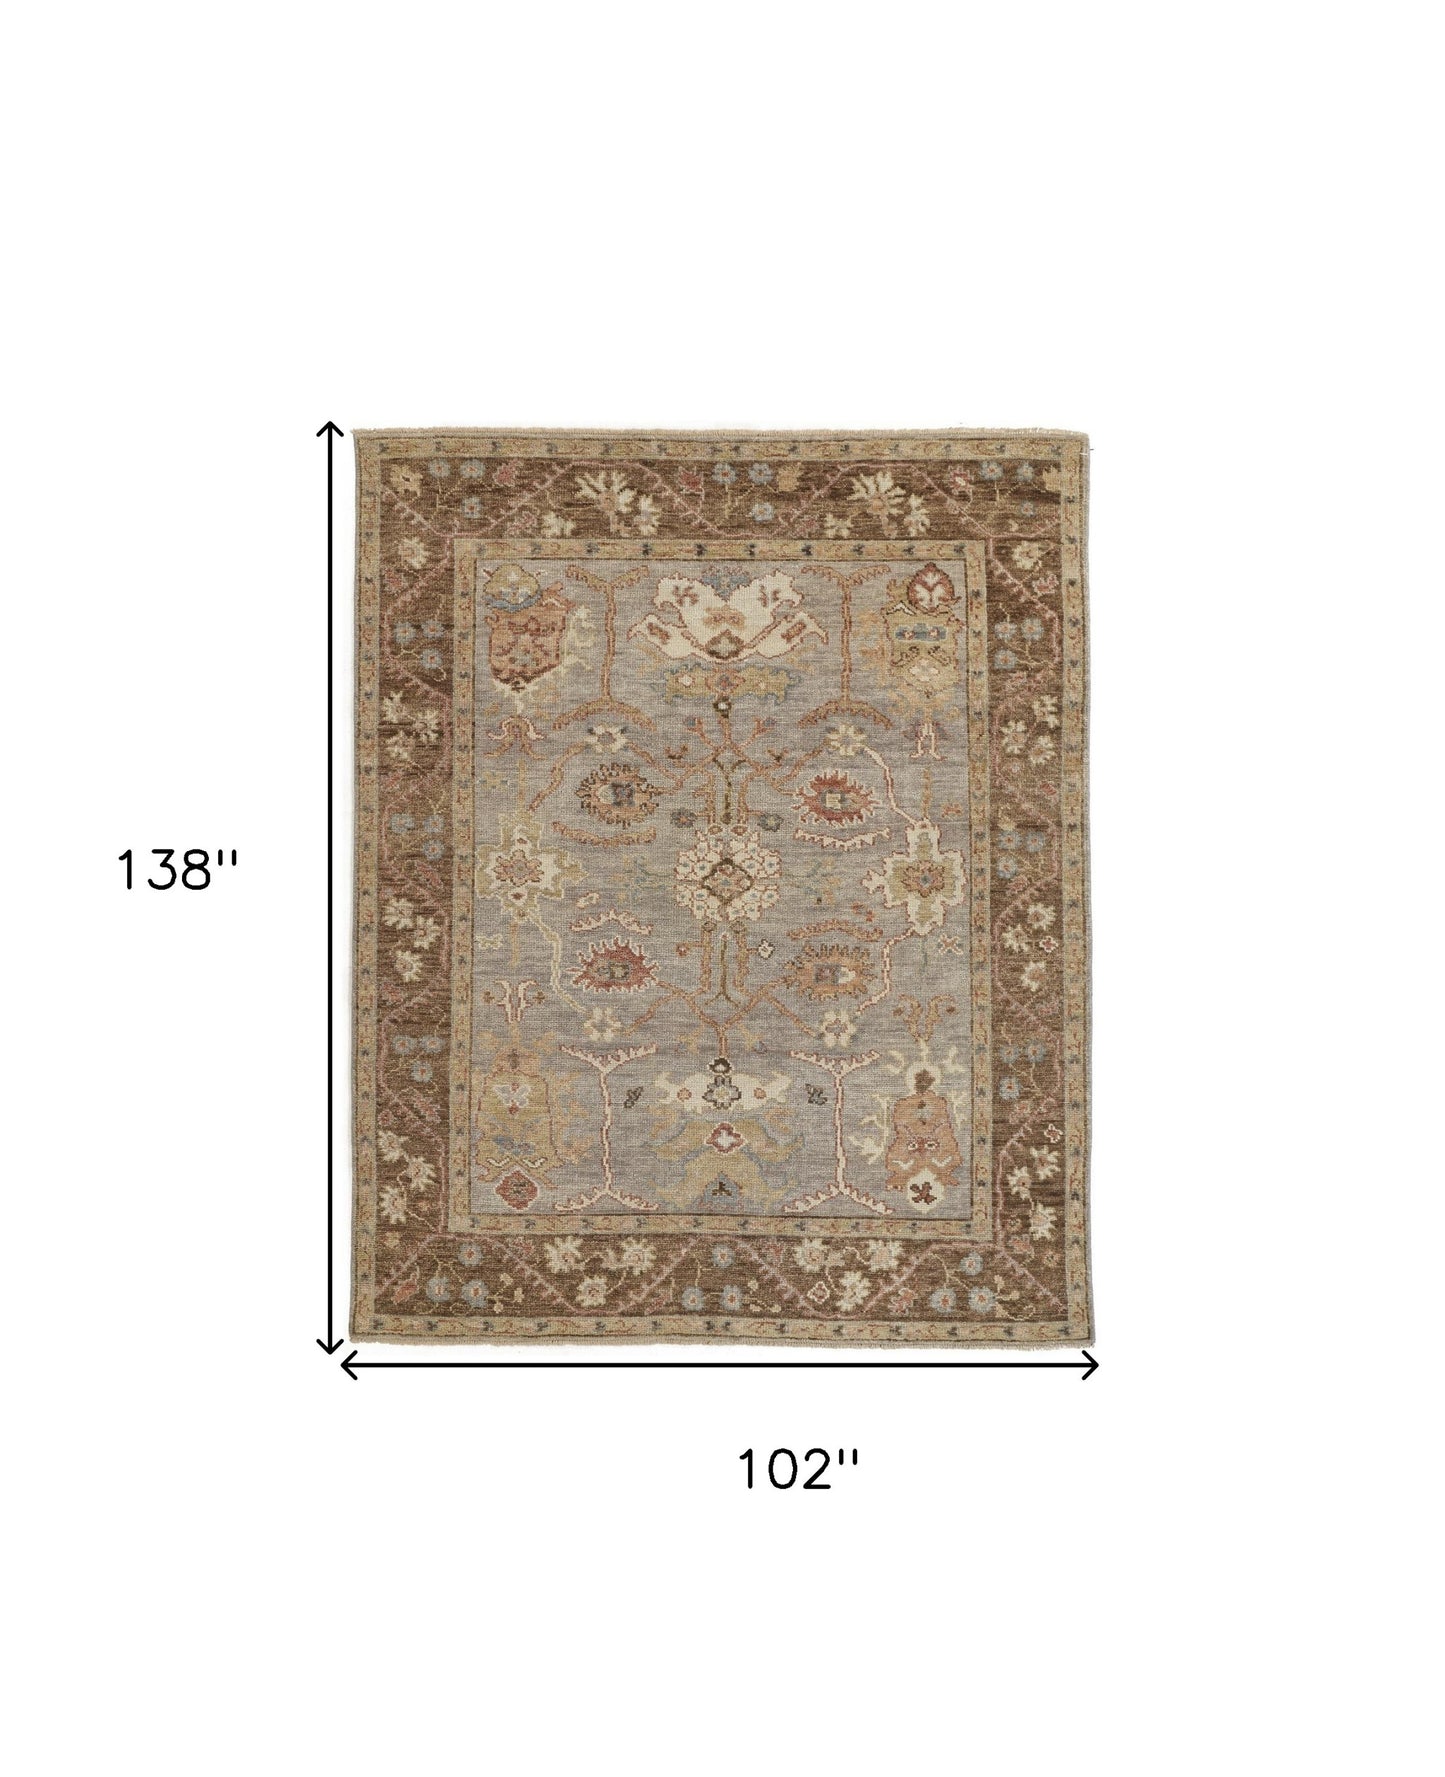 5' X 8' Gray Brown And Gold Wool Floral Hand Knotted Stain Resistant Area Rug With Fringe